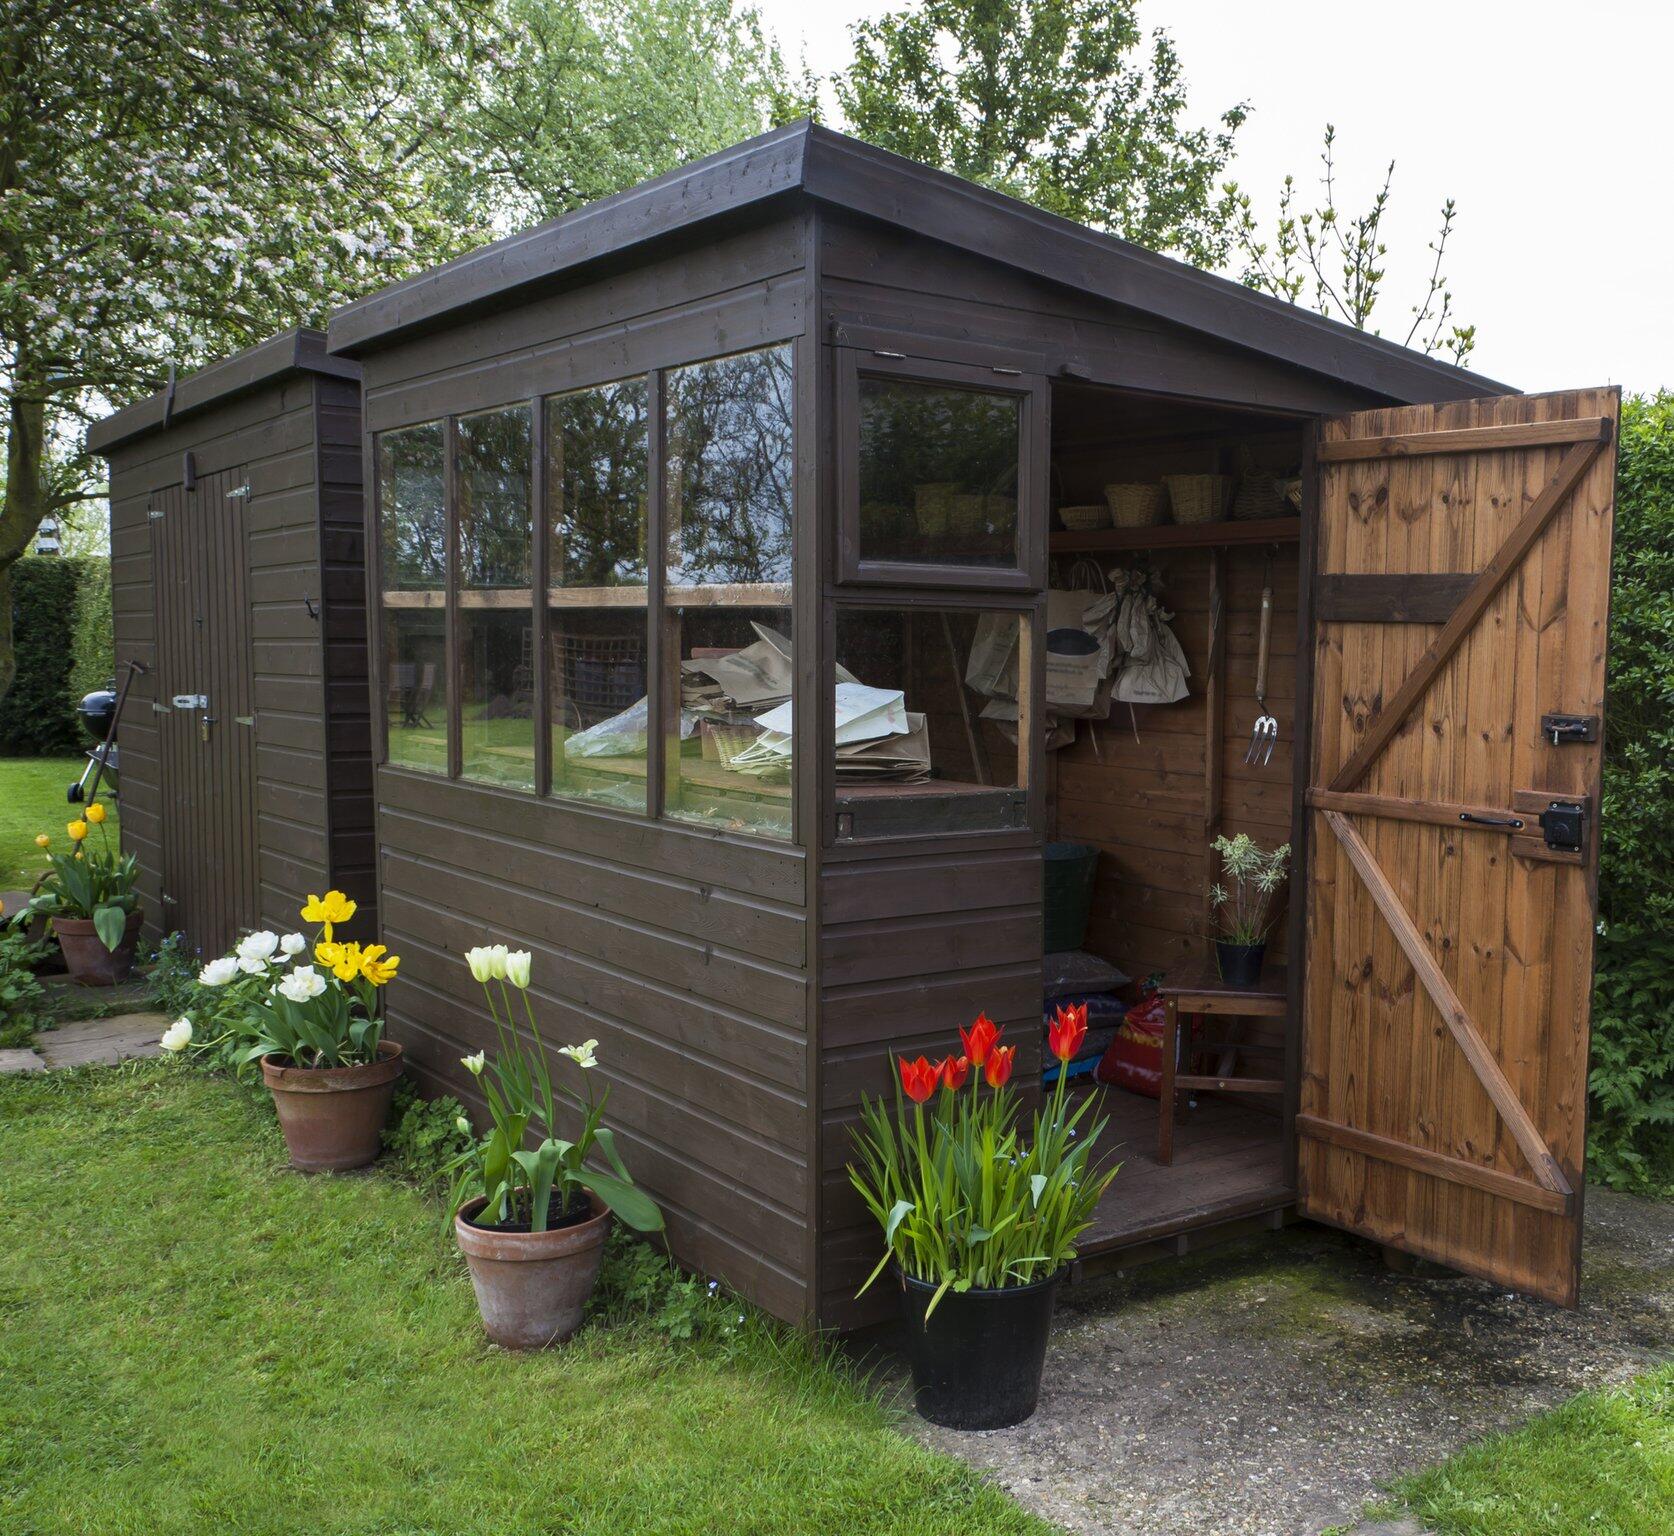 The Benefits of a Portable Storage Shed for Small Living Spaces